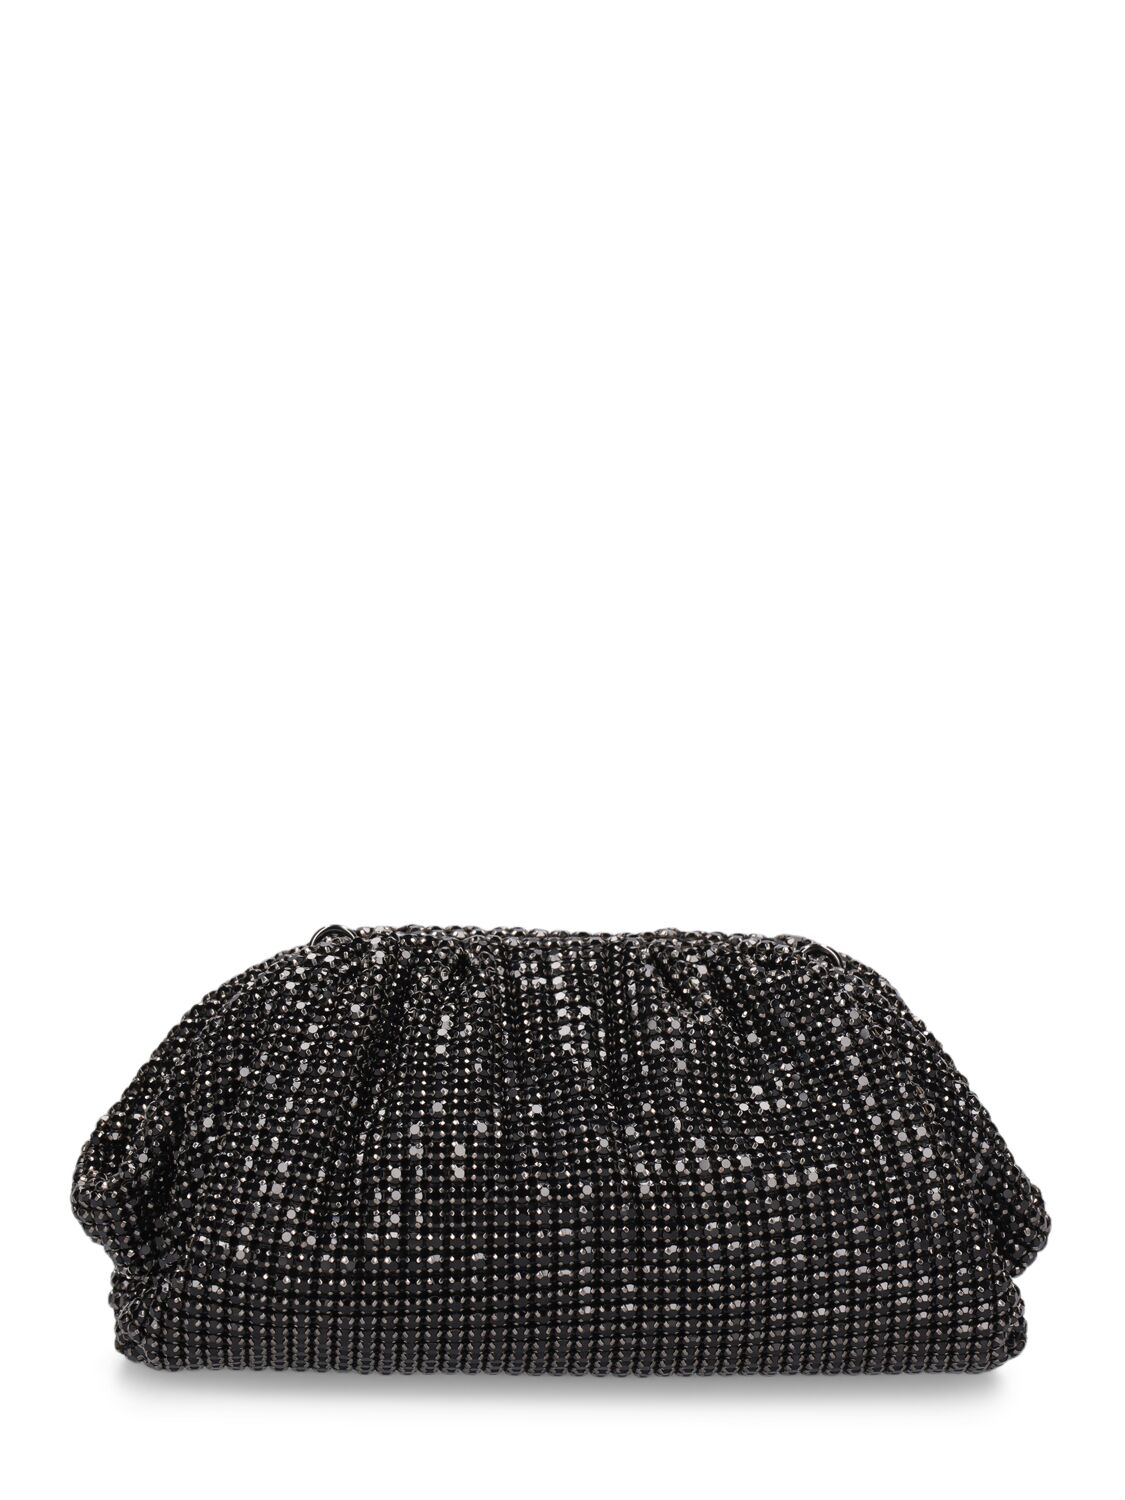 Image of Diamante Leather & Crystal Pouch